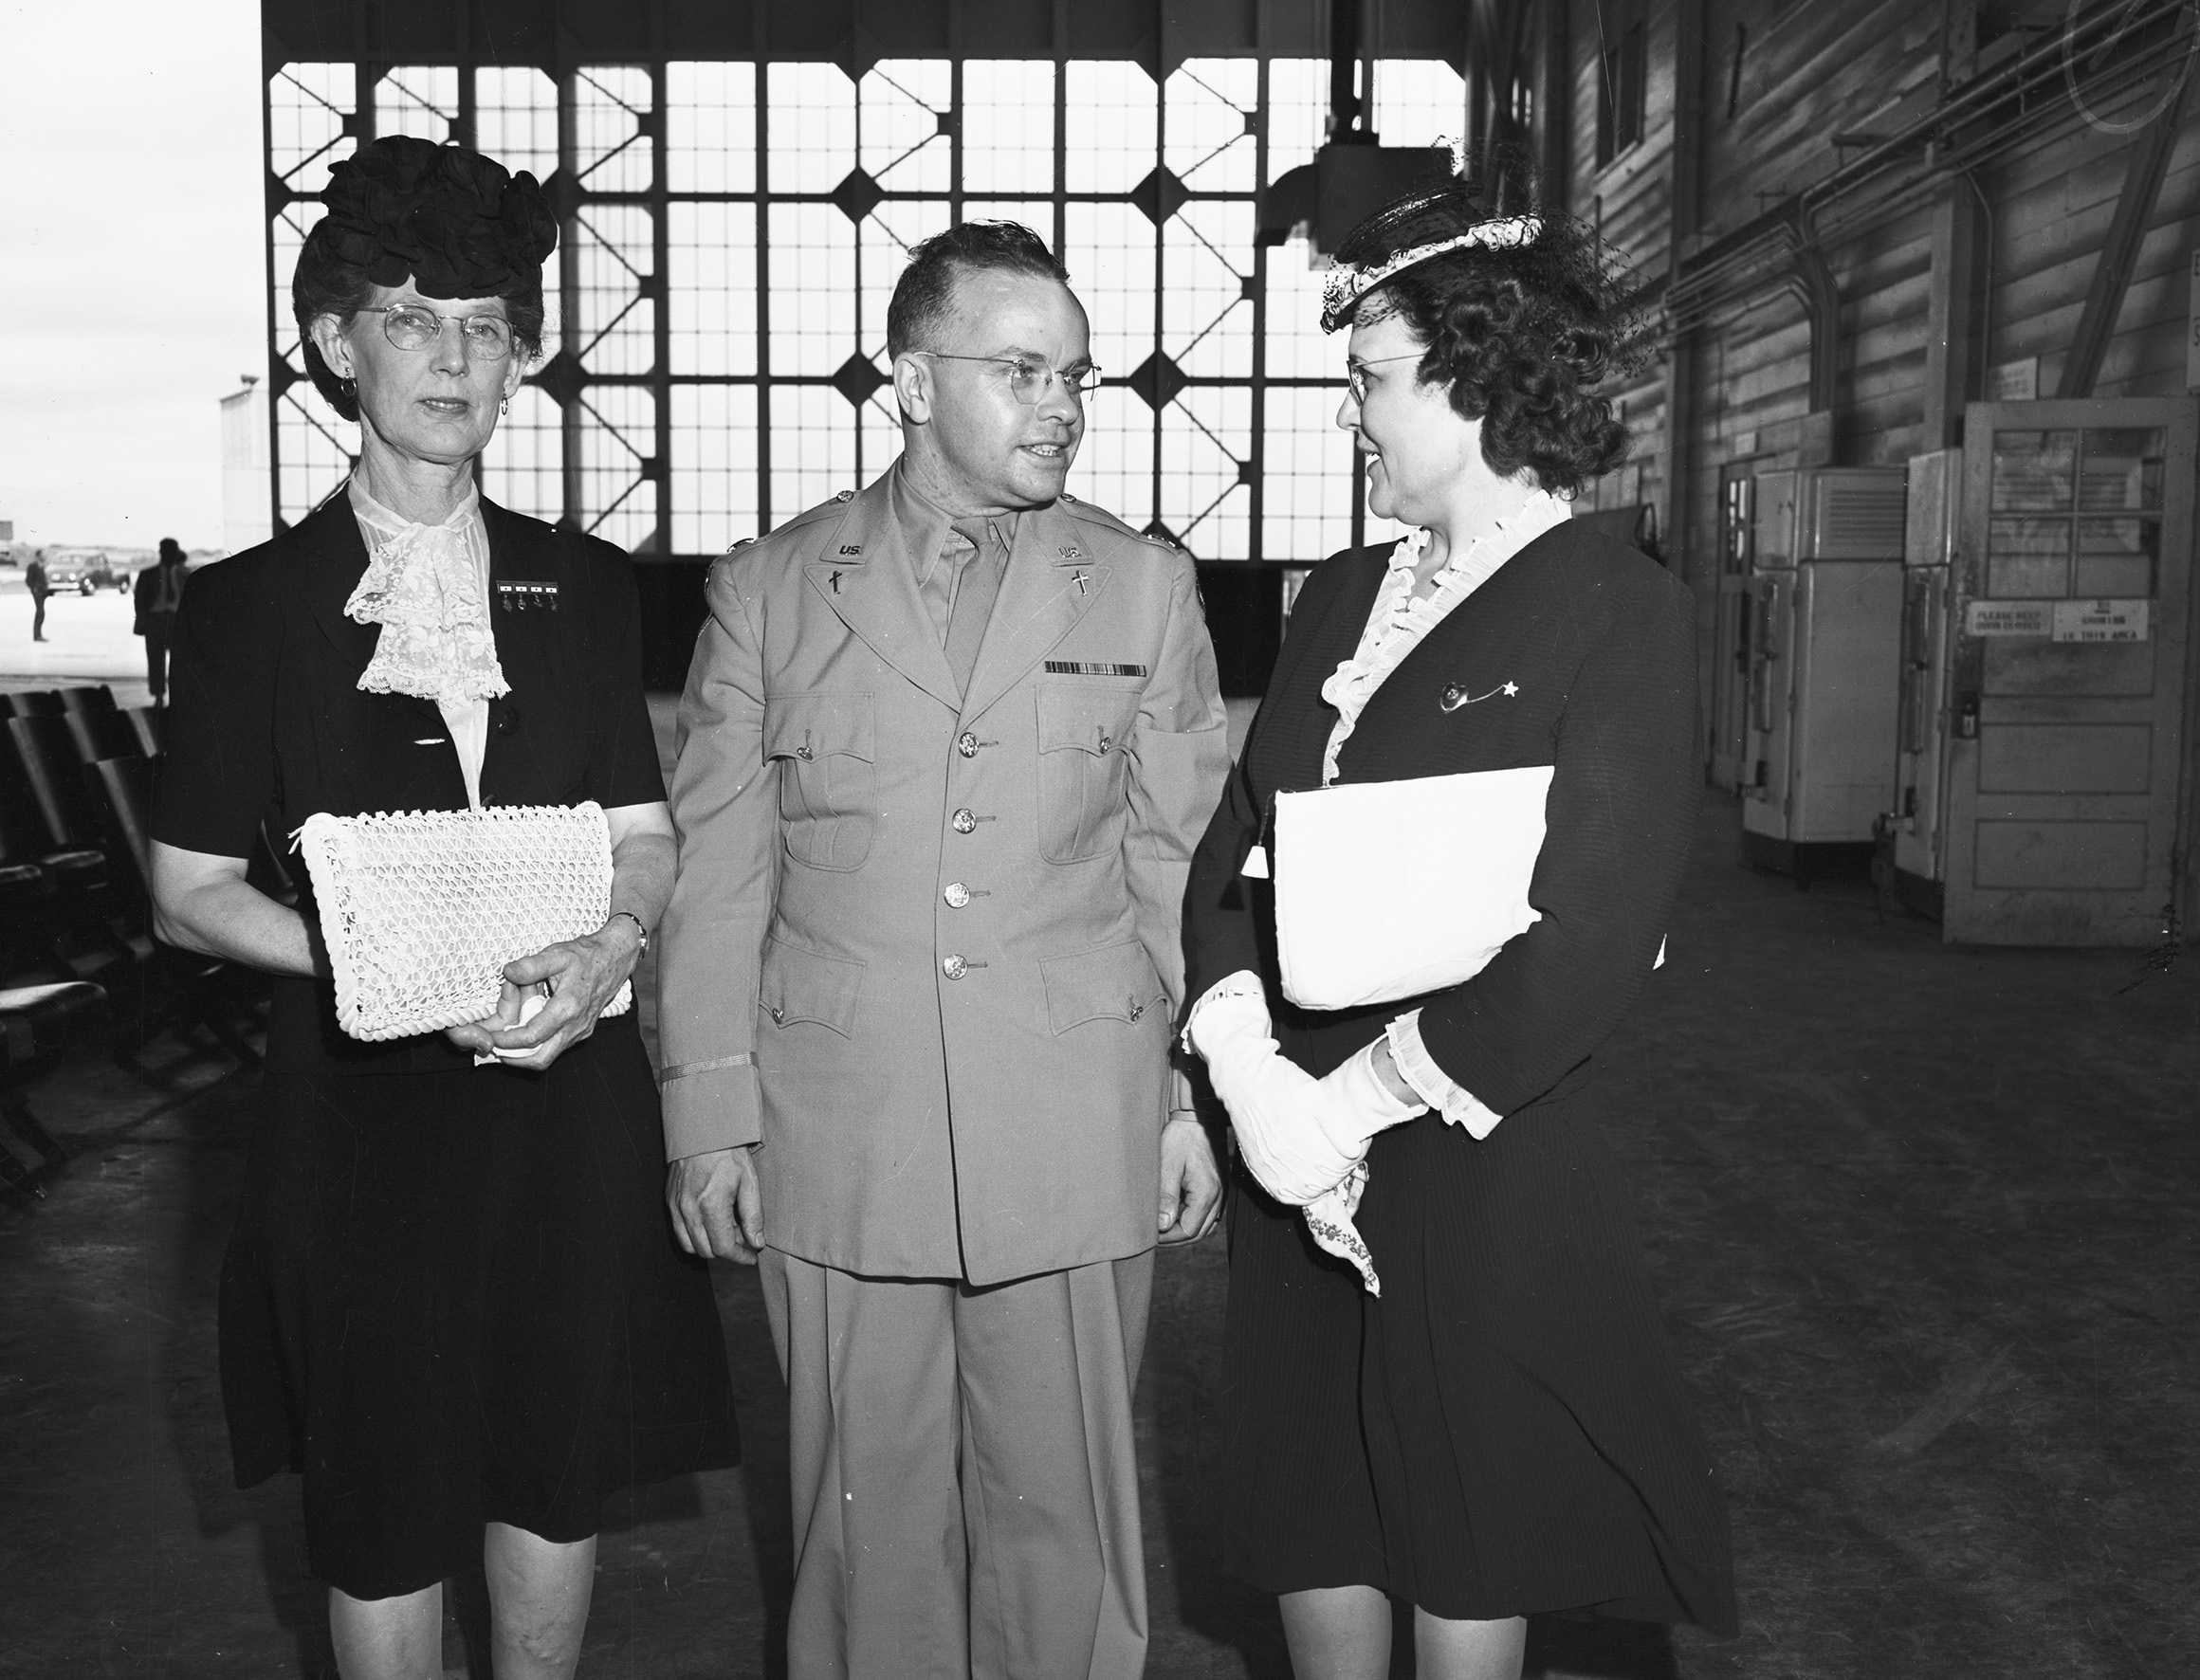 Mrs. J. J. Boydstun, left, Chaplain Orville Dennis at center, and Mrs. W. C. O'Briant. The women are wearing dark 1940's styled dressed and Dennis is wearing his military chaplain uniform. They are in what appears to be a plane hangar. 